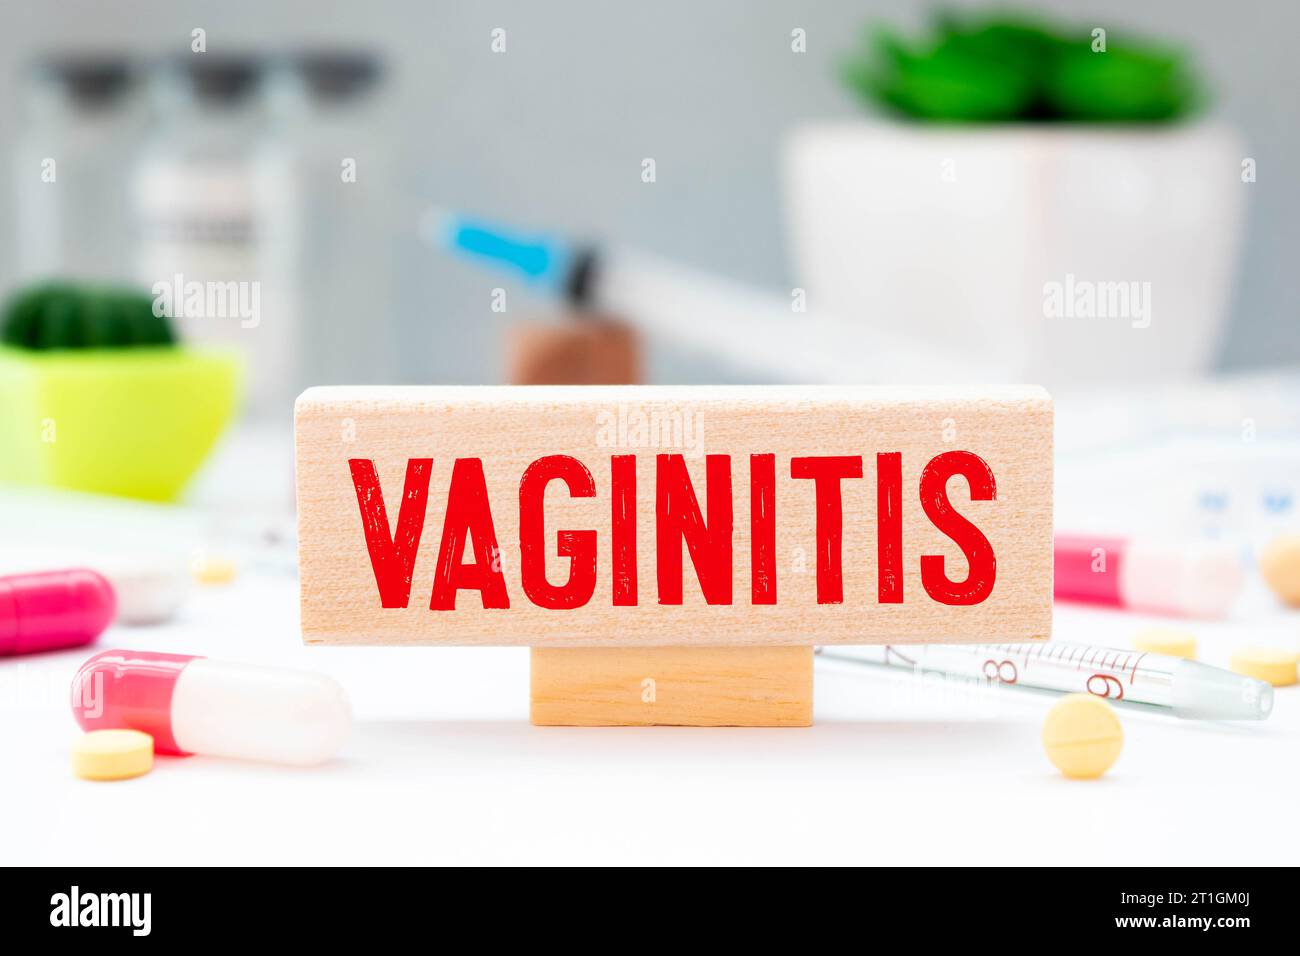 On the desktop is a stethoscope, documents, a pen, and a red file folder with the text VAGINITIS. Medical concept. Stock Photo